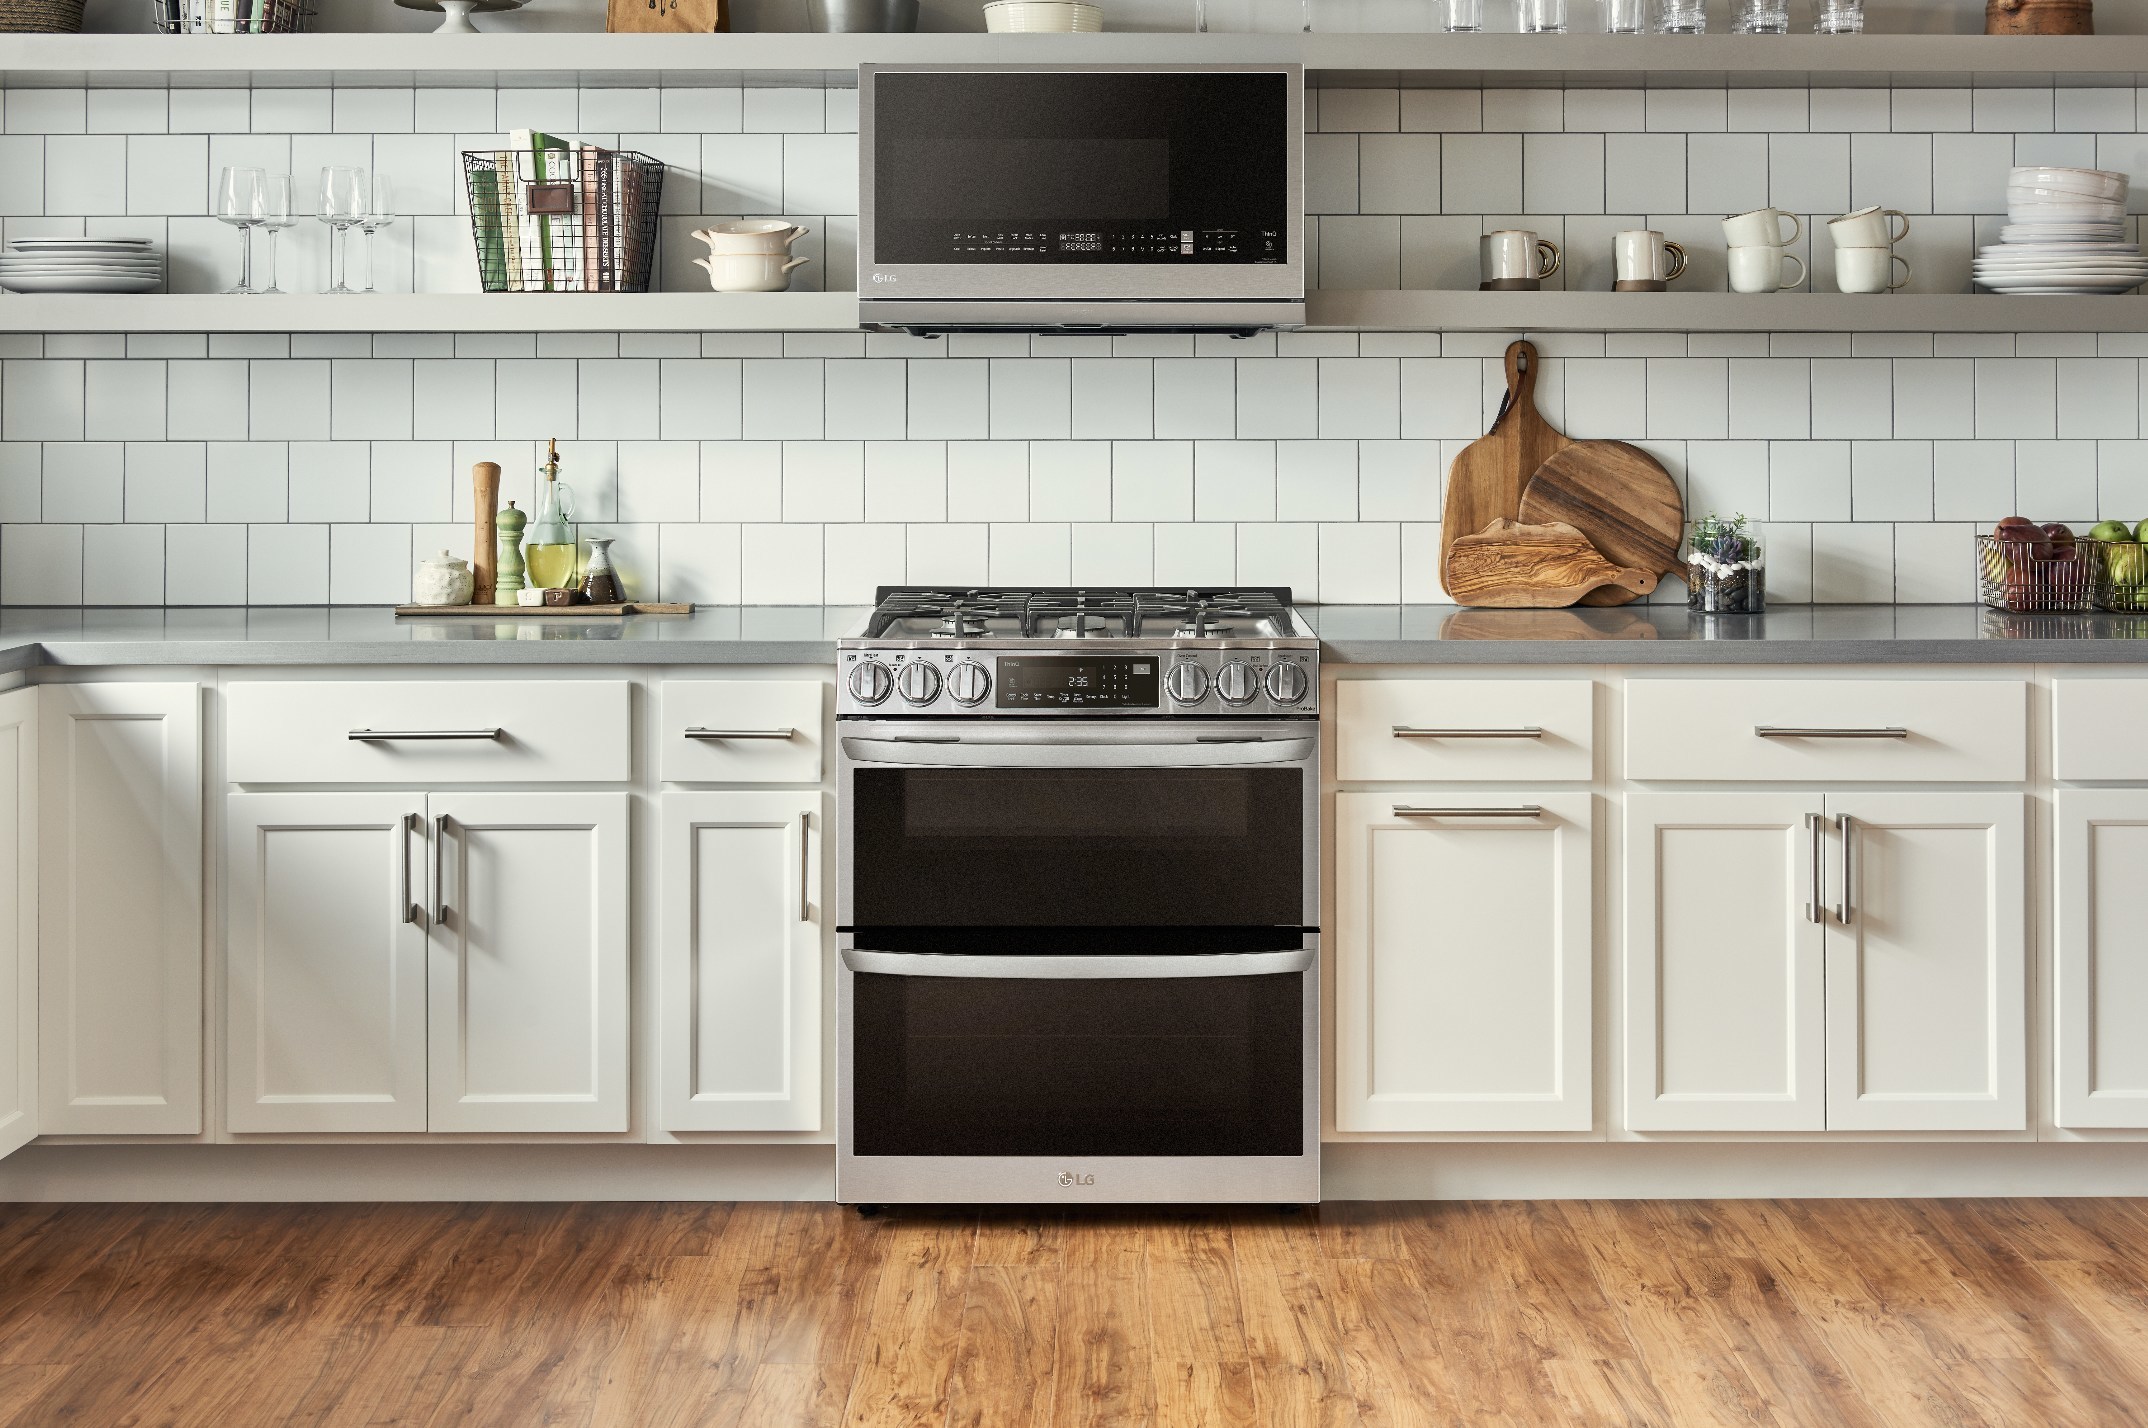 LG’S NEW FEATURE-PACKED KITCHEN DUO UPGRADES THE COOKING EXPERIENCE WITH ThinQ™ RECIPES AND MORE